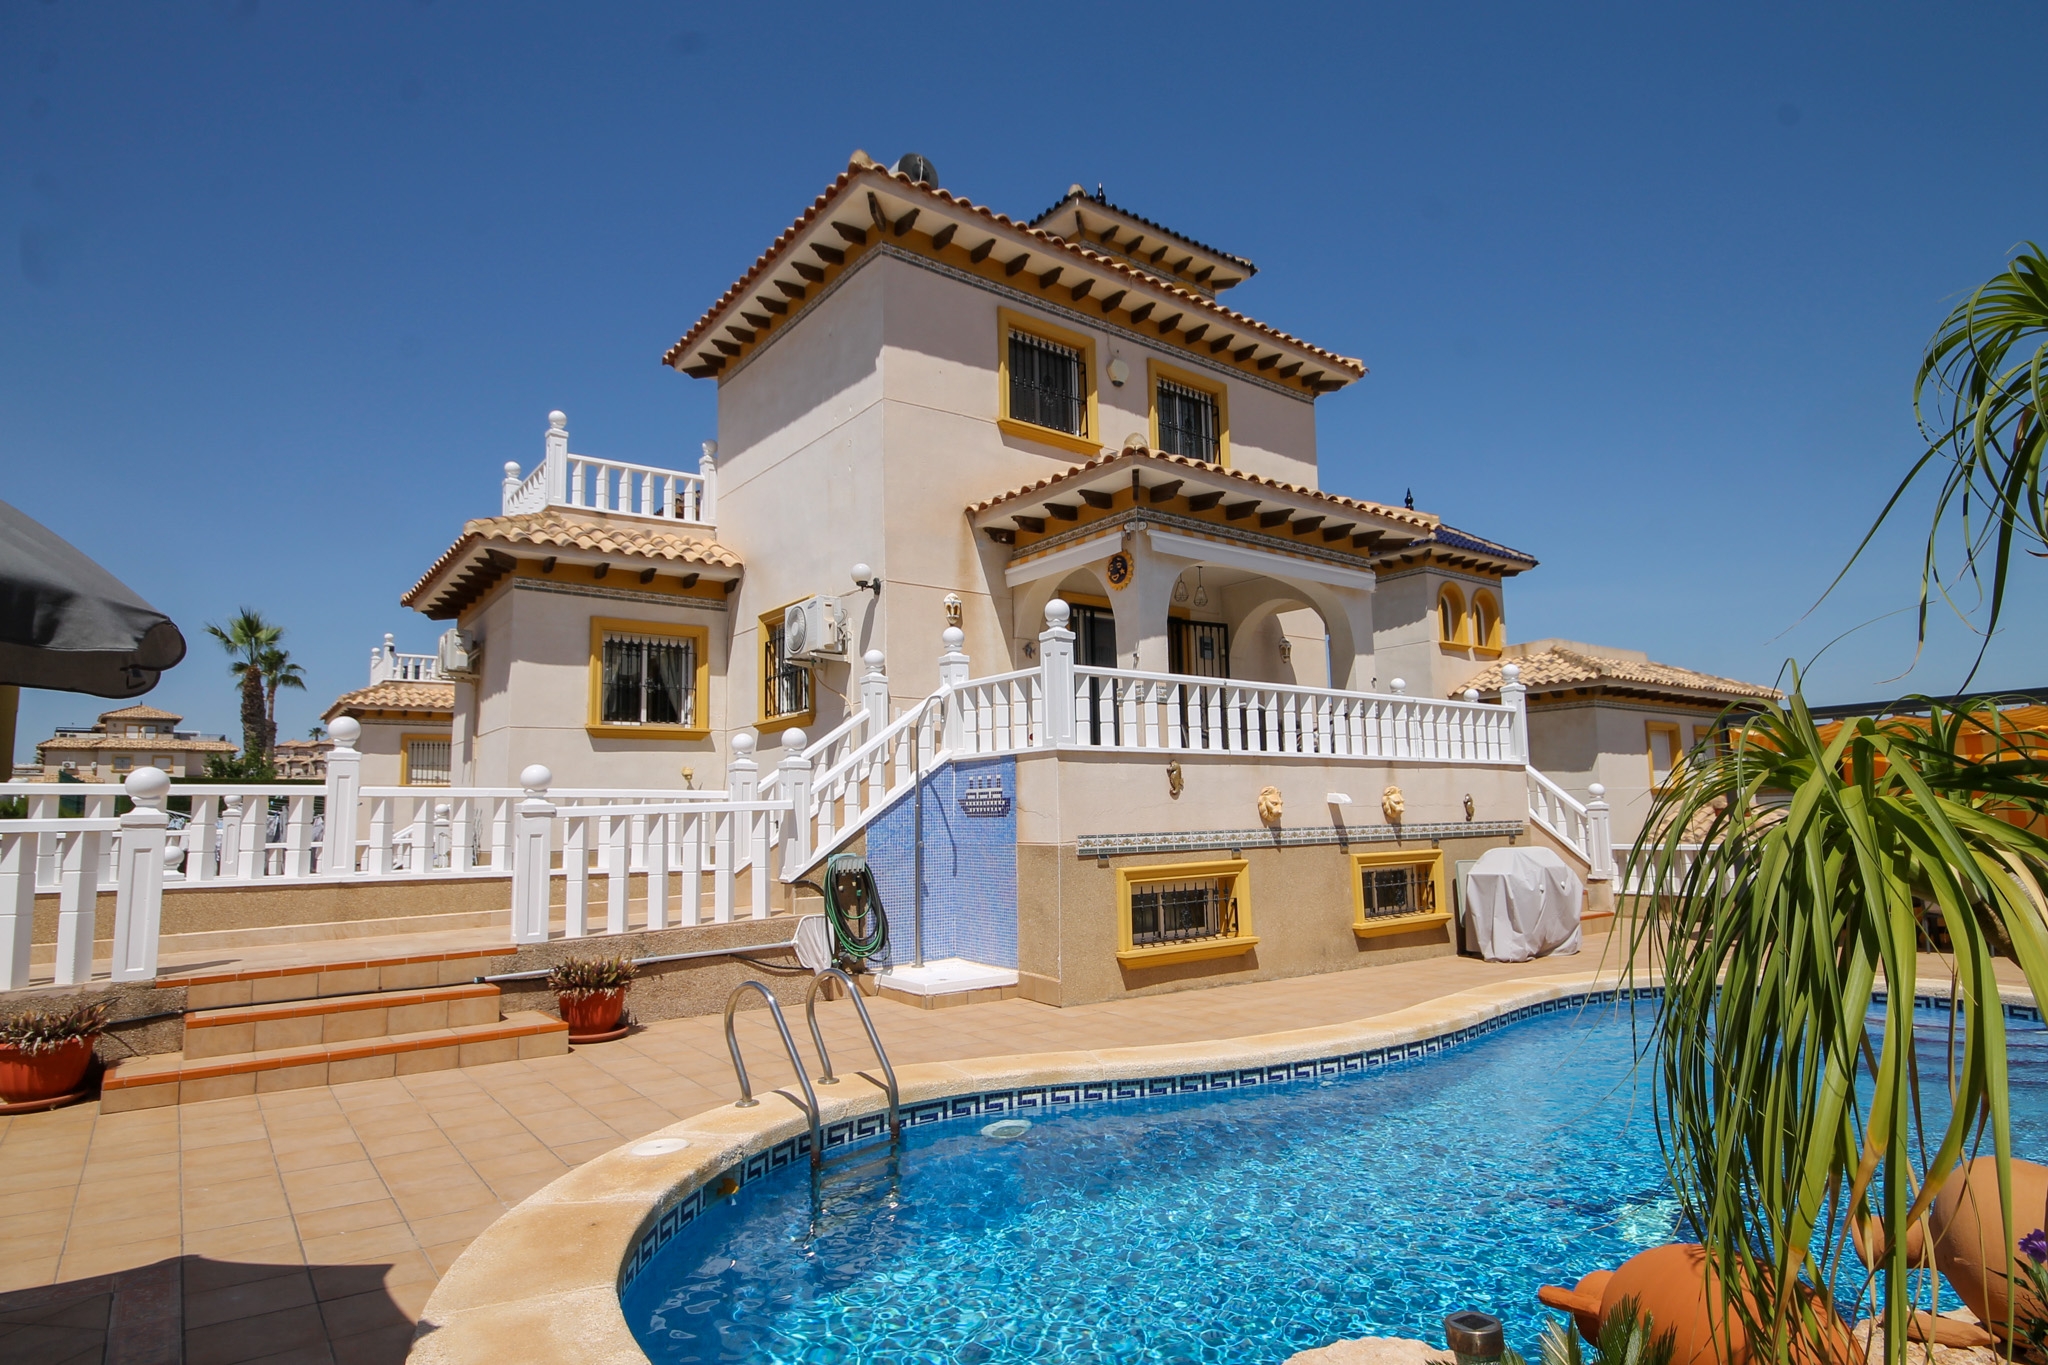 Immaculate 4 bed detached villa with pool